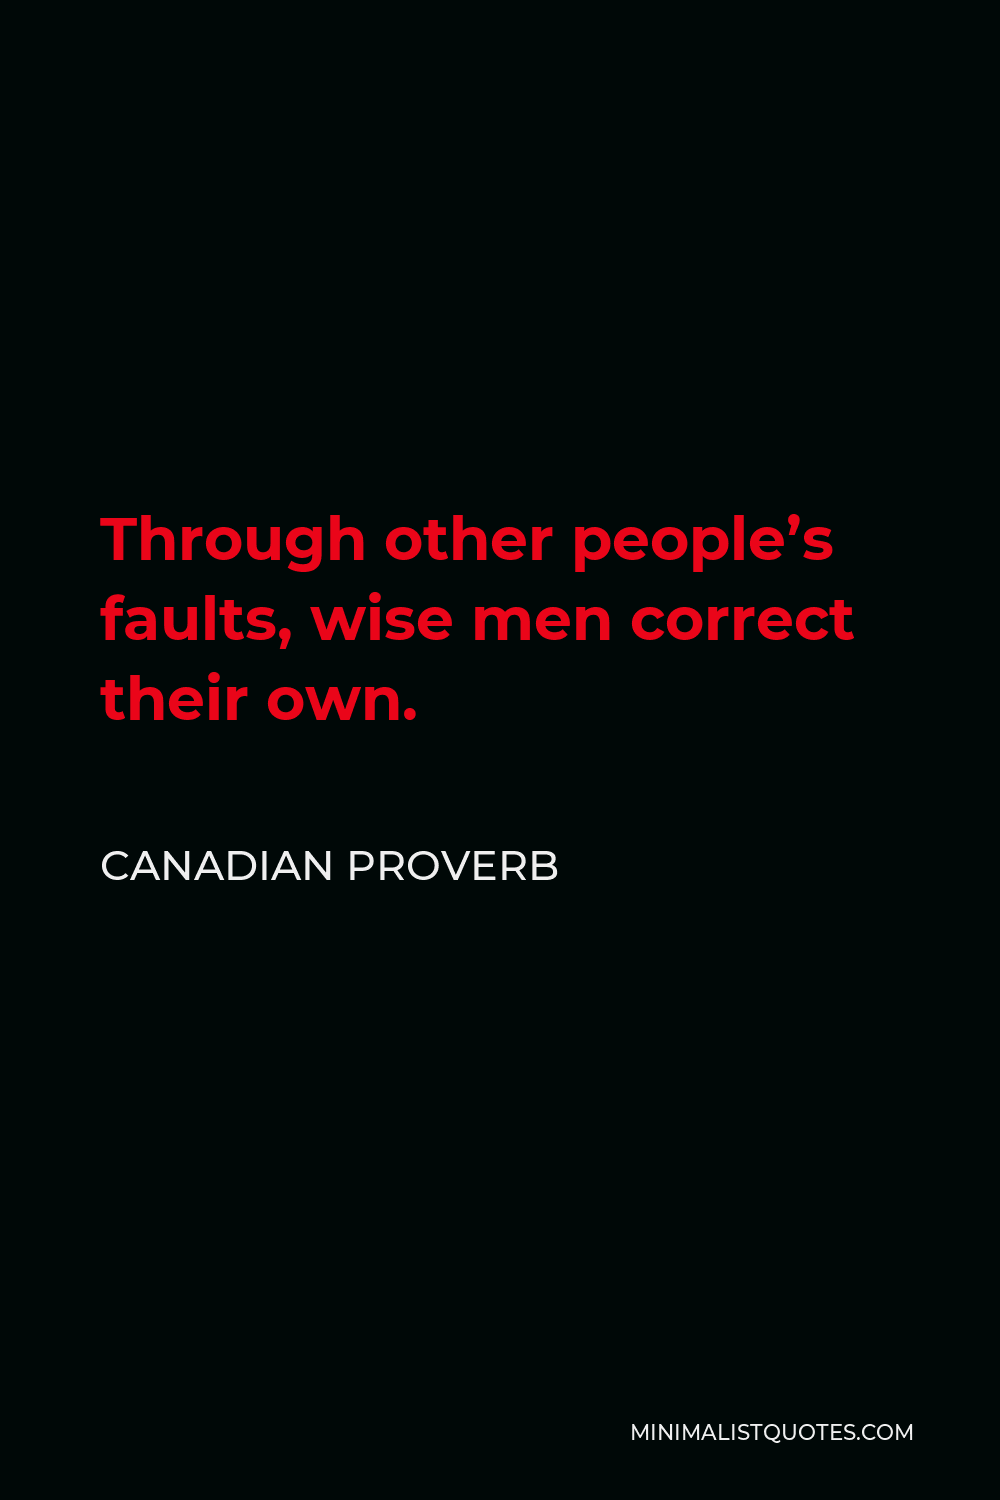 Canadian Proverb Quote - Through other people’s faults, wise men correct their own.